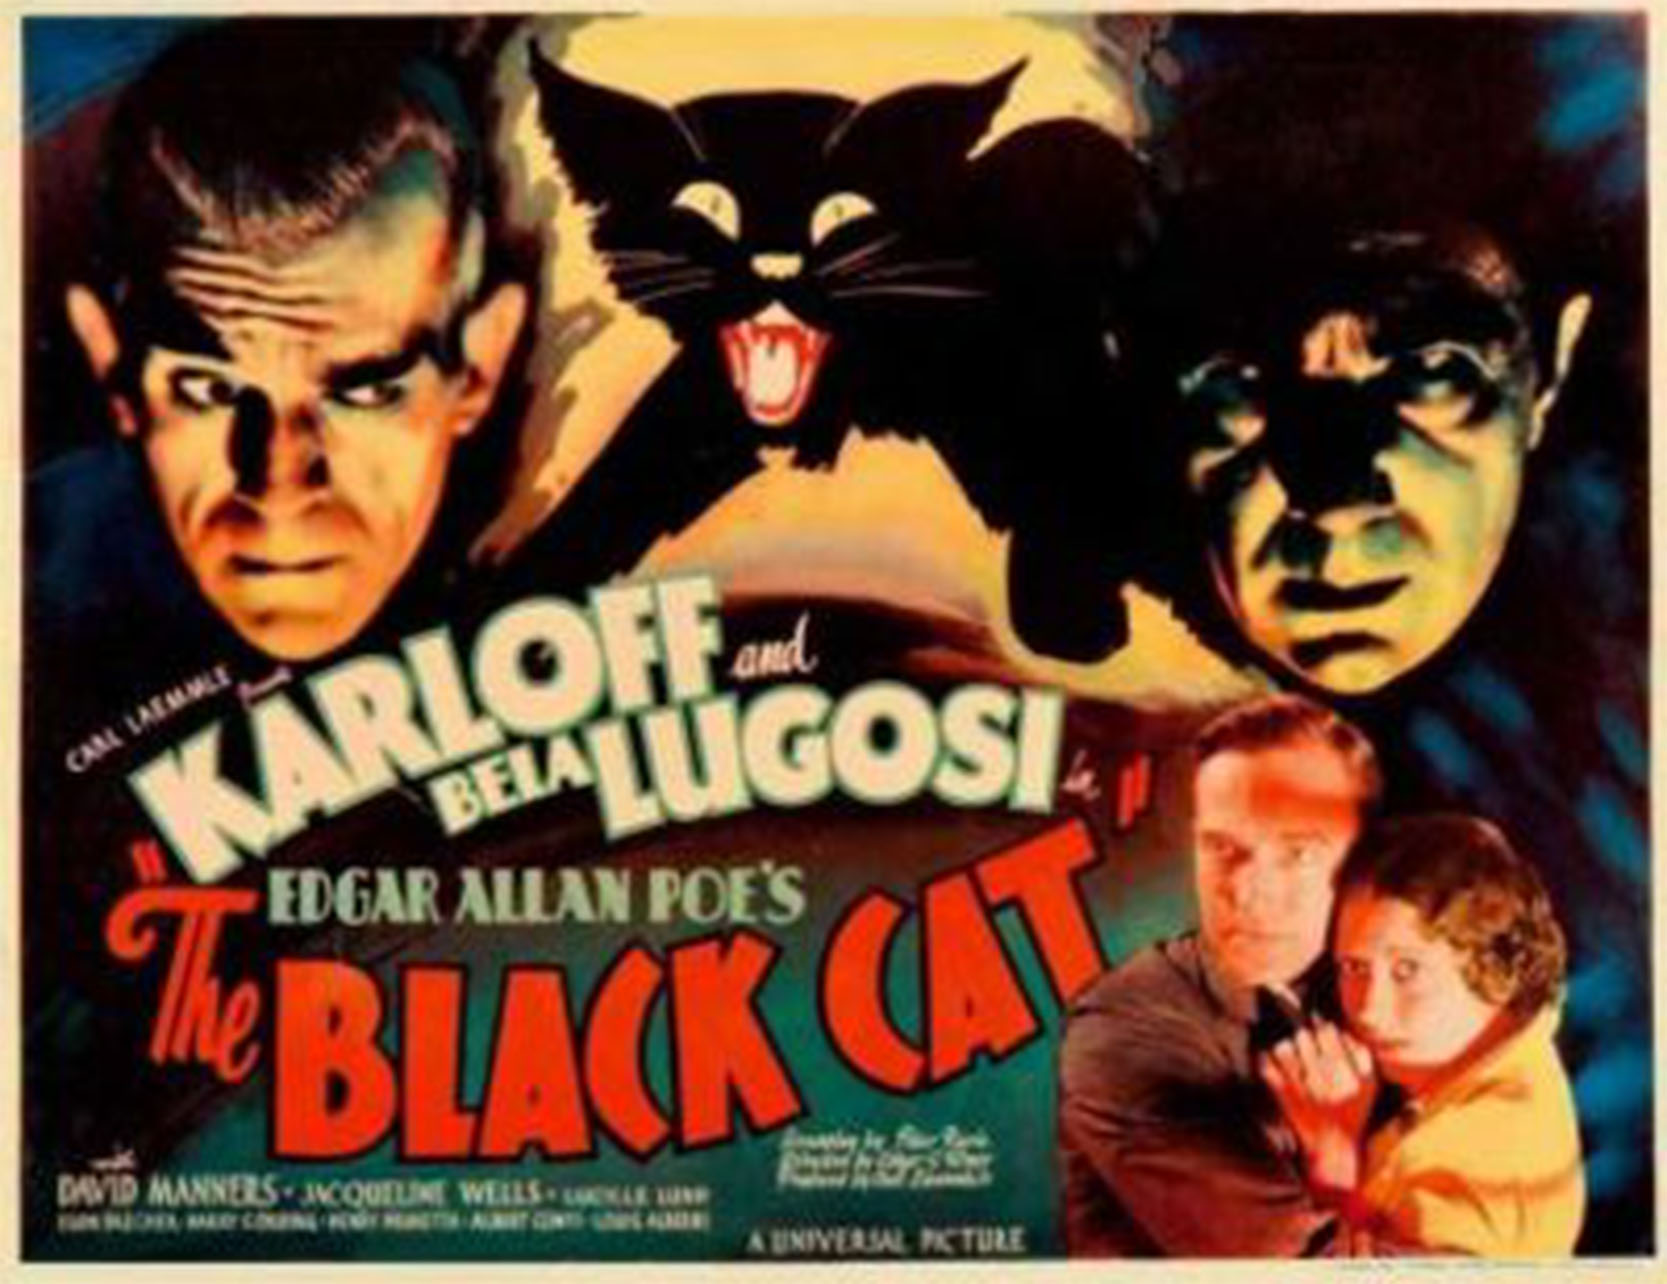 The+Black+Cat_Movie+Review